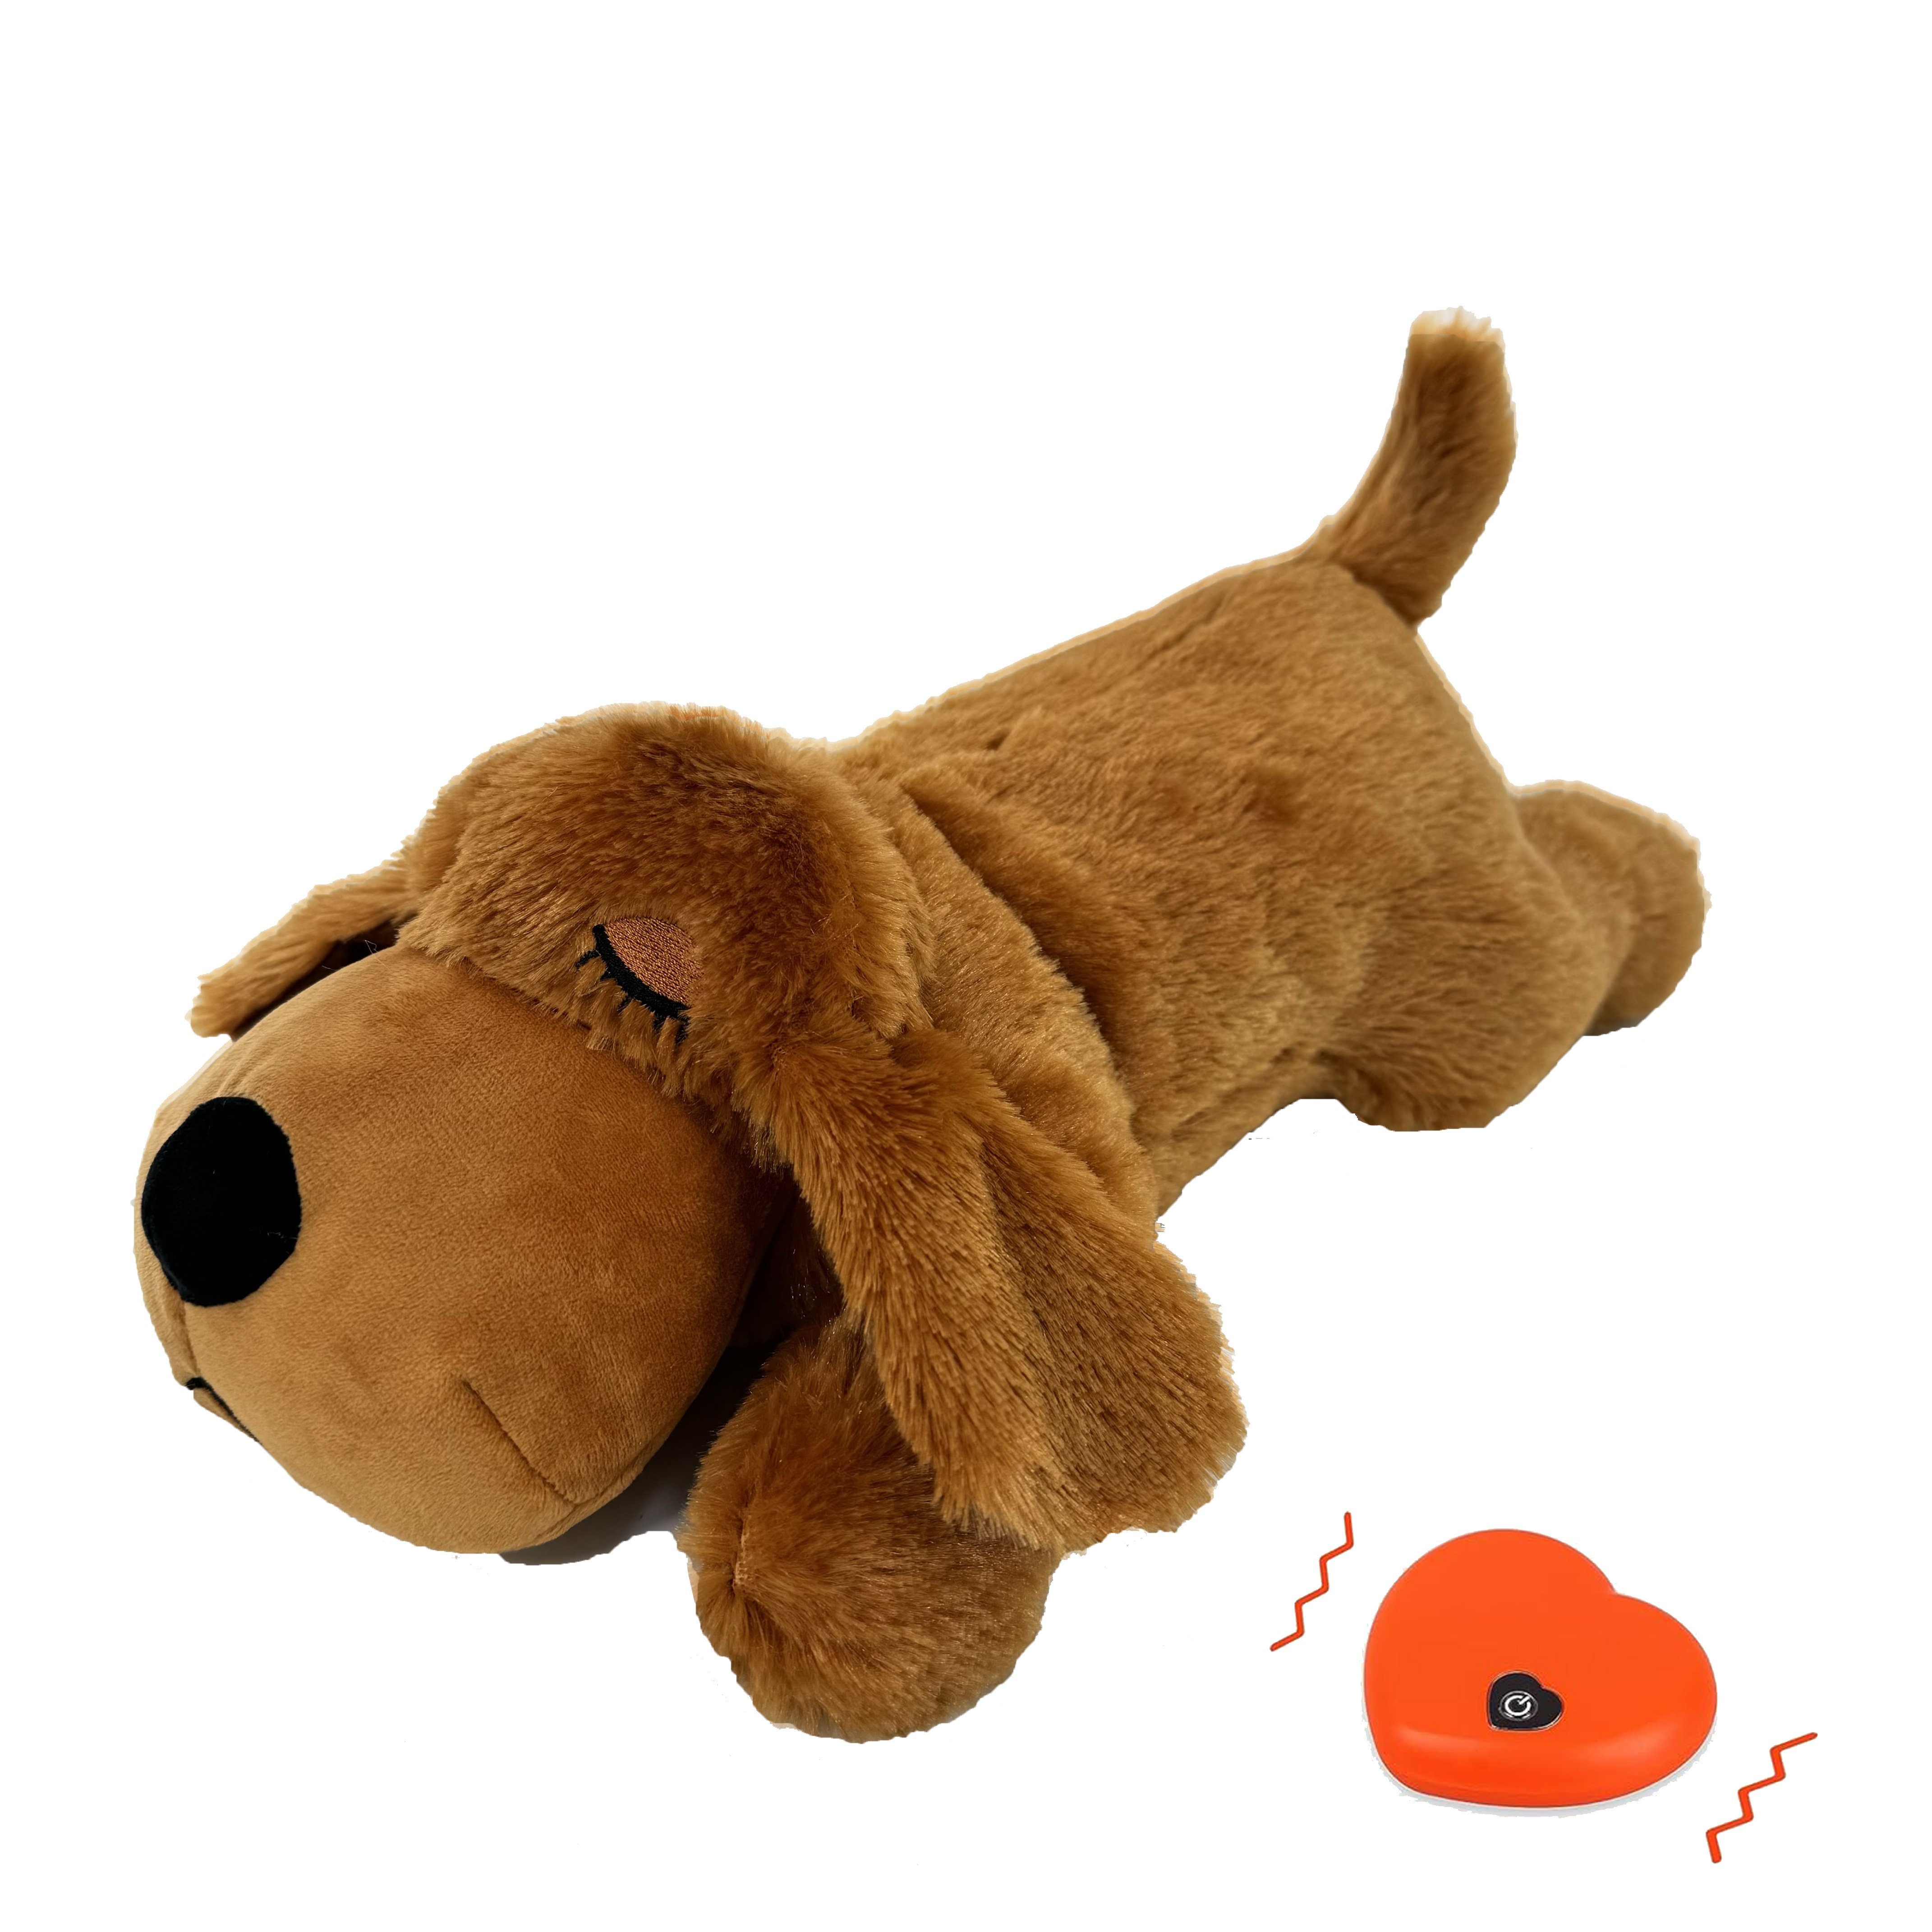 

Heartbeat Puppy Plush Toy For Dogs With Soothing Pulse, Comfort Aid For Sleep And , Medium Breed Polyester Stuffed Animal, 1 Pc - Brown